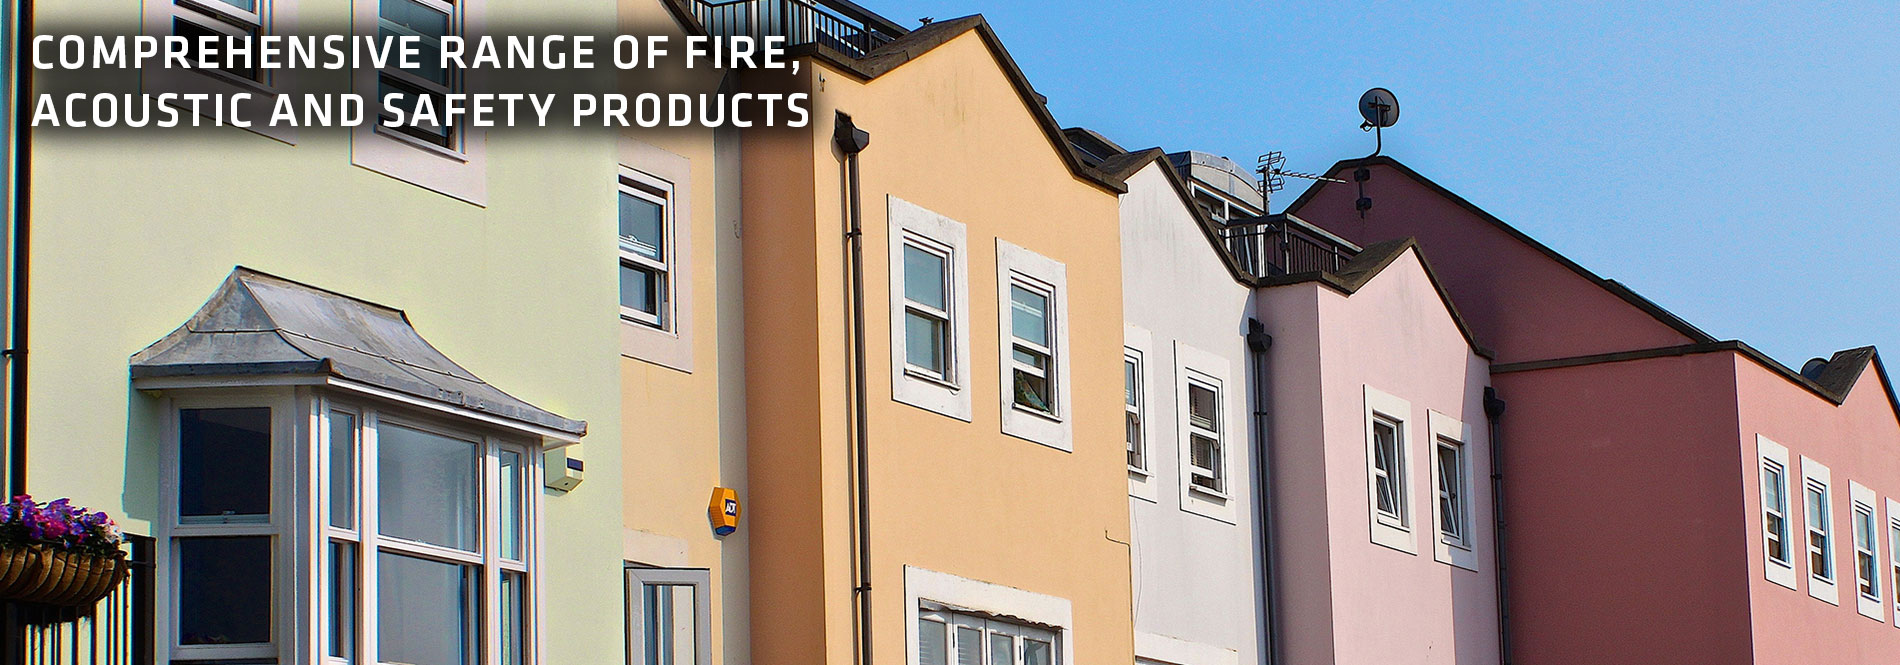 Astroflame - A Comprehensive range of fire, acoustic and safety products